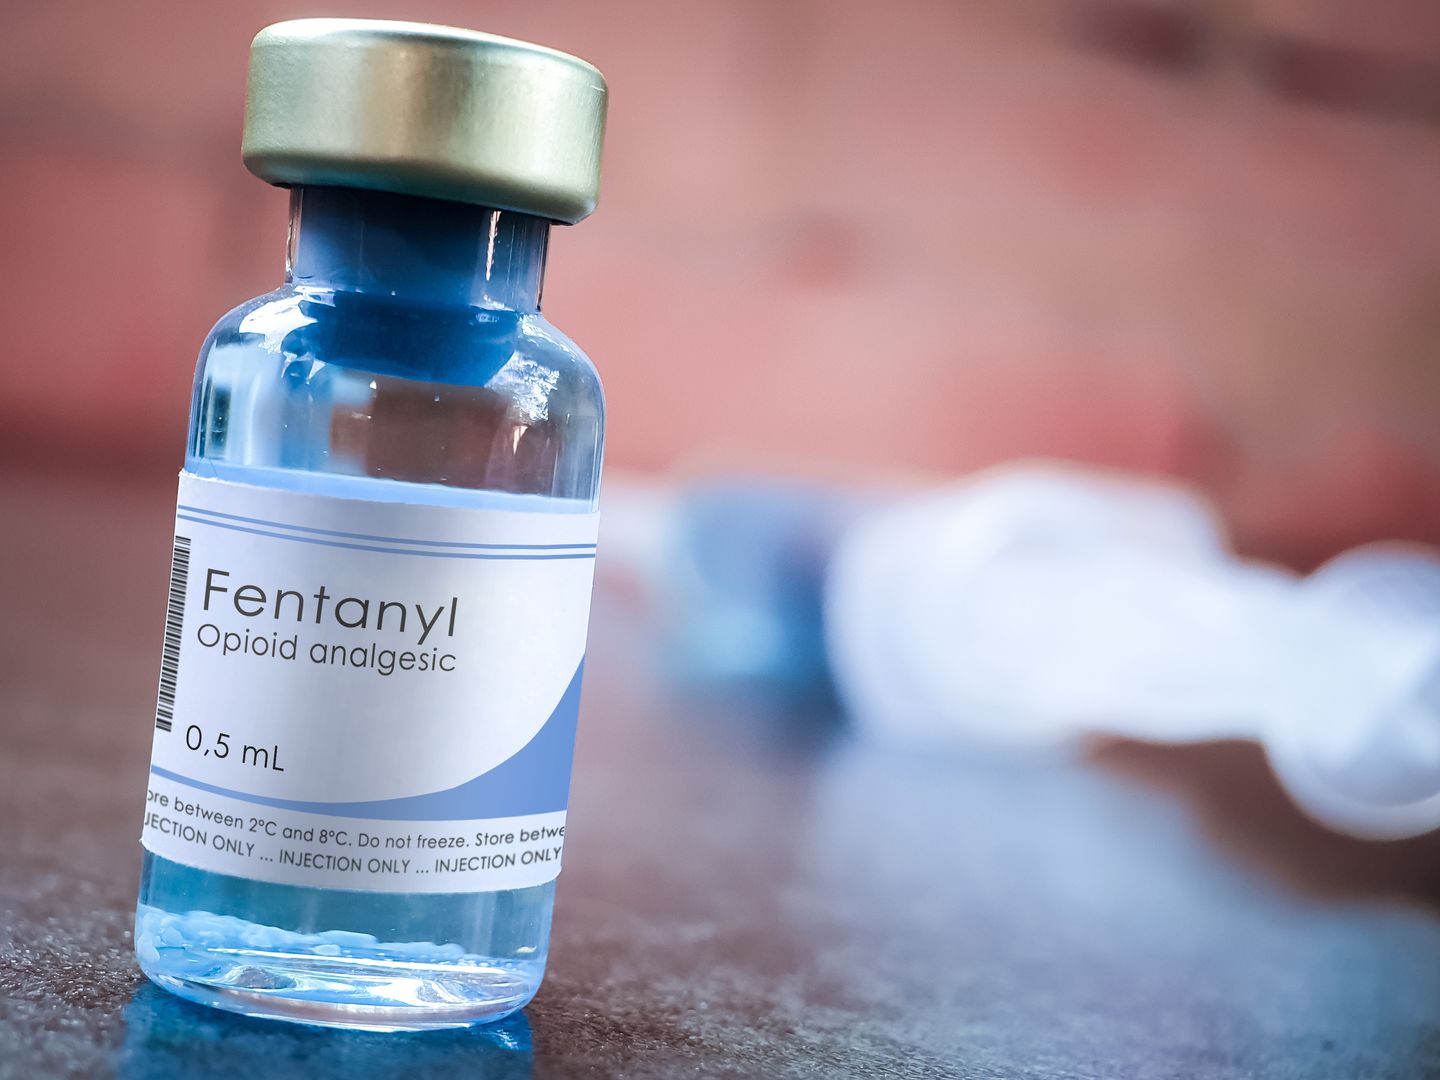 Minnesota man gets life in prison for selling fentanyl-laced drugs online, causing 11 deaths